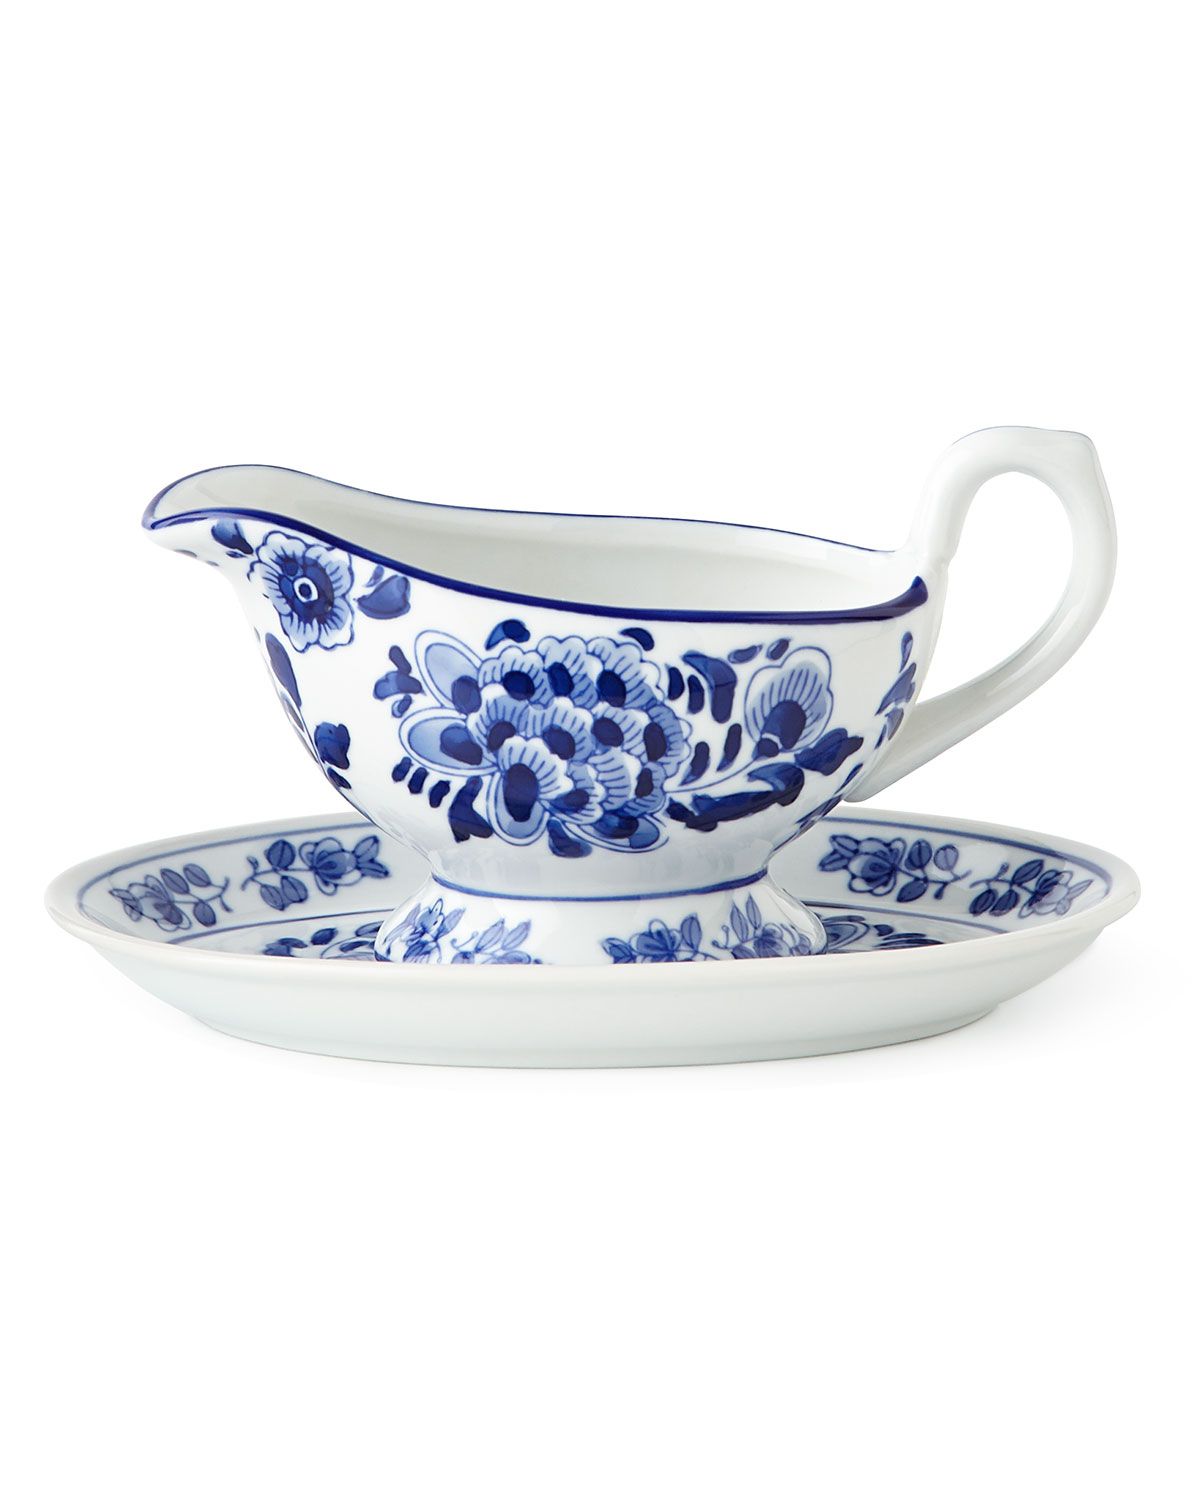 Neiman Marcus Blue and White Gravy Boat and Stand